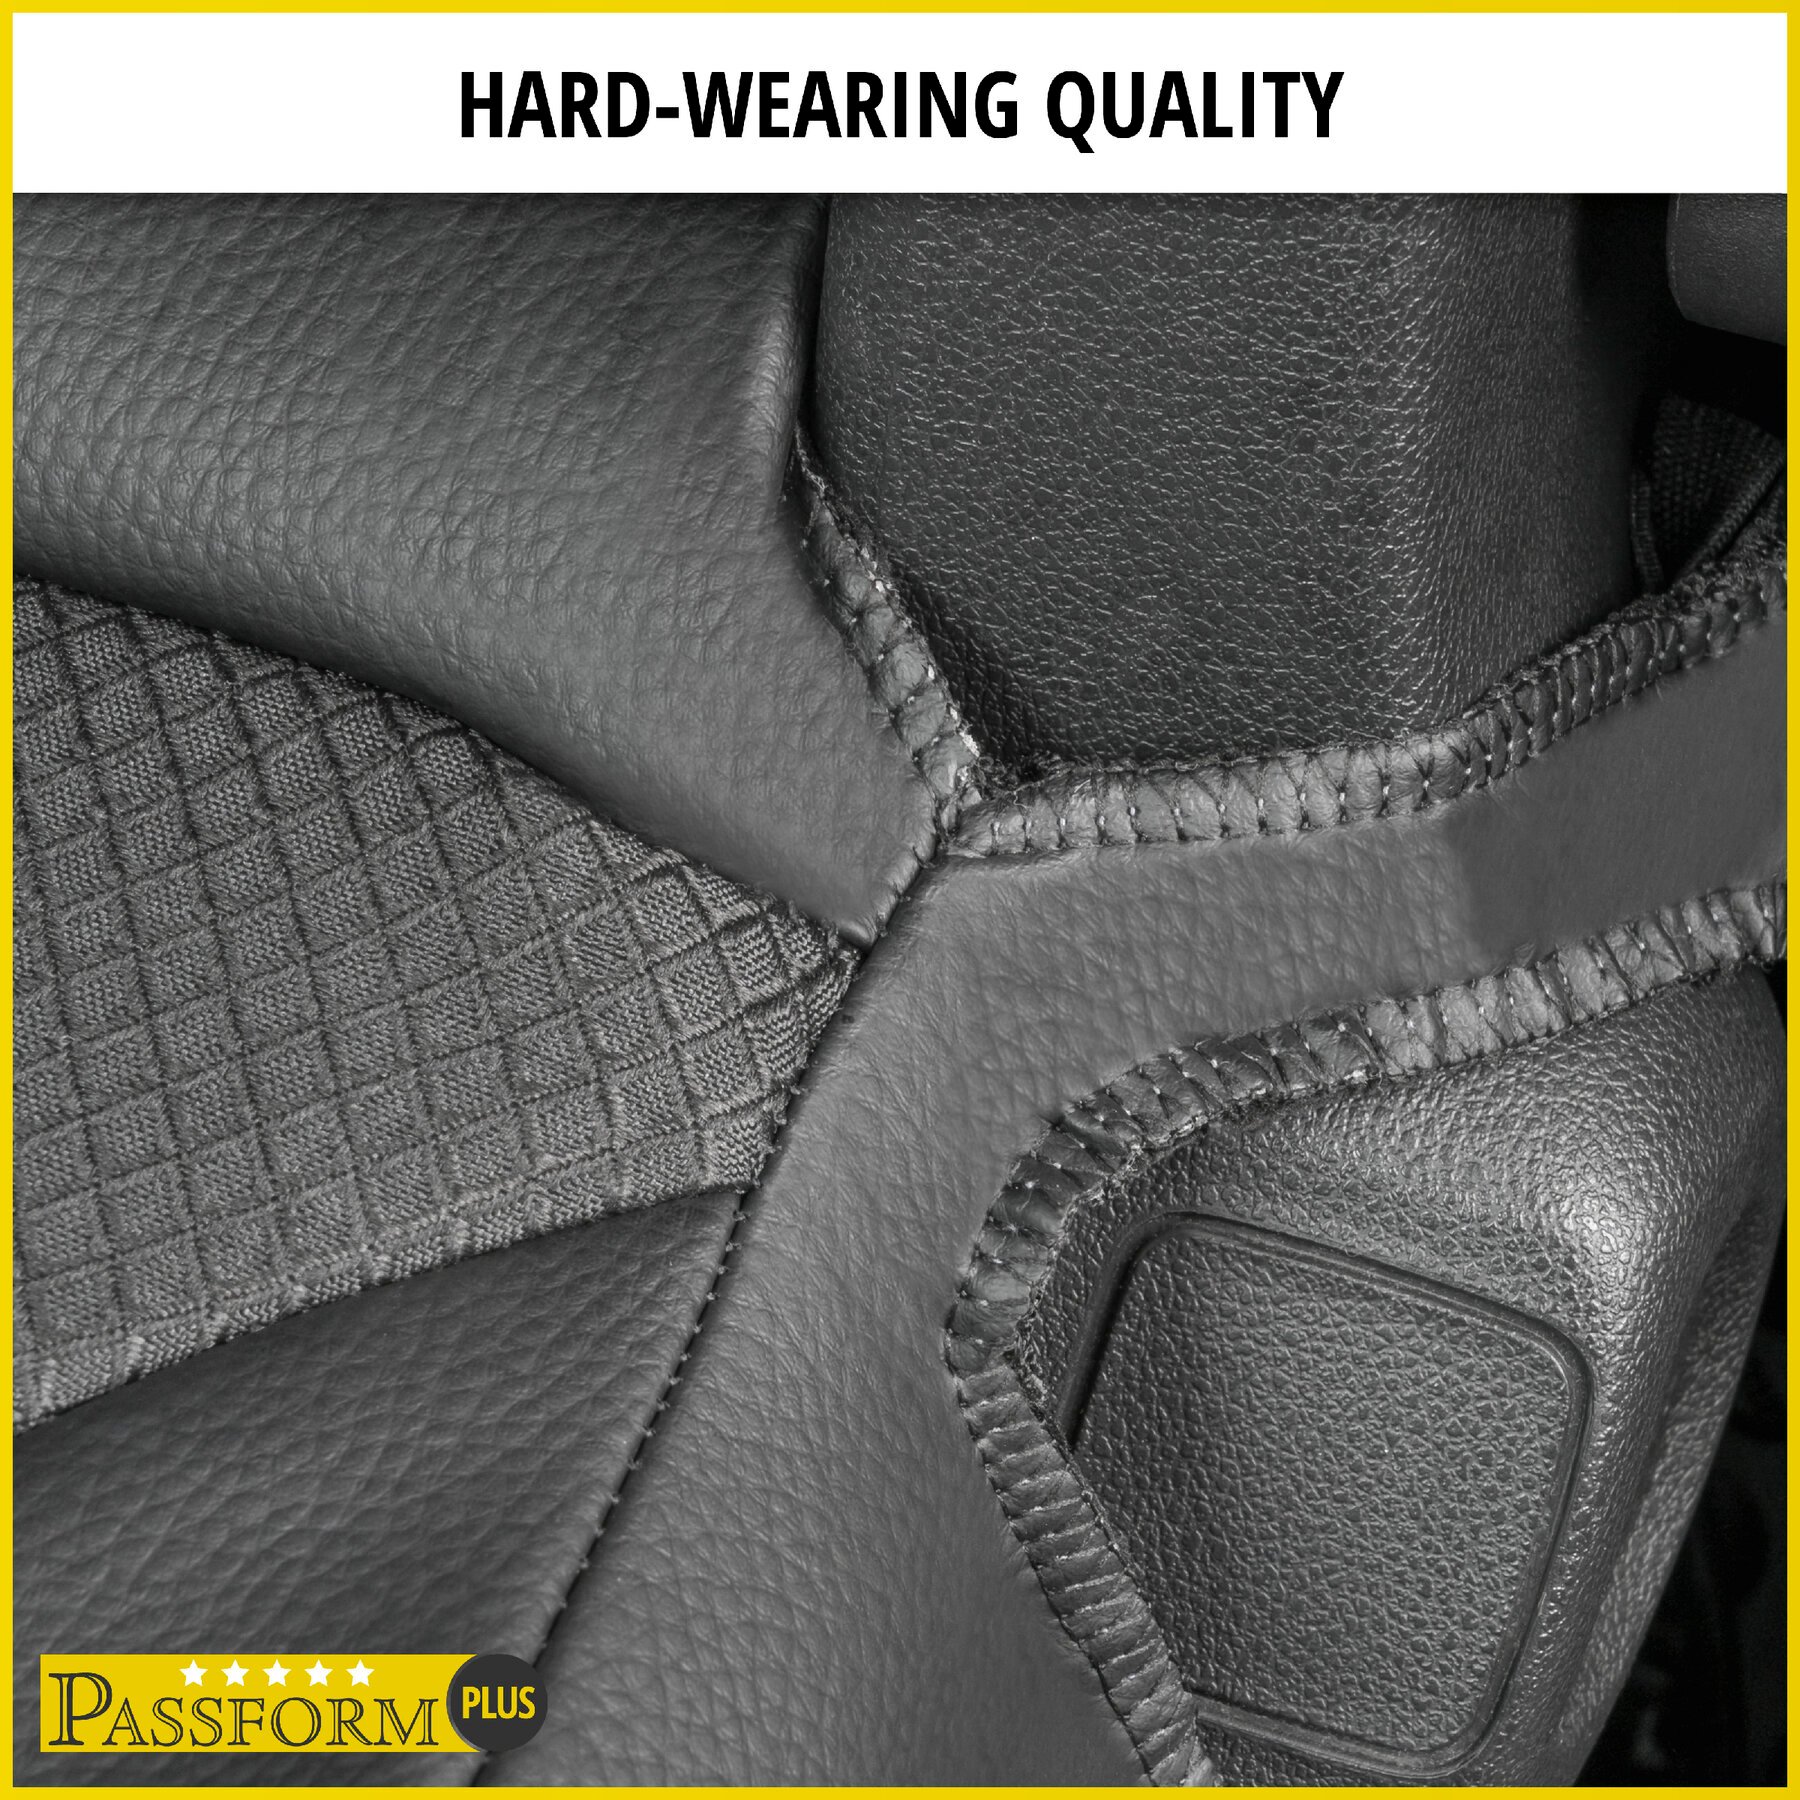 Premium Seat Cover for Fiat Talento 06/2016-Today, 1 single seat cover front + armrest cover, 1 double bench cover backrest and bench